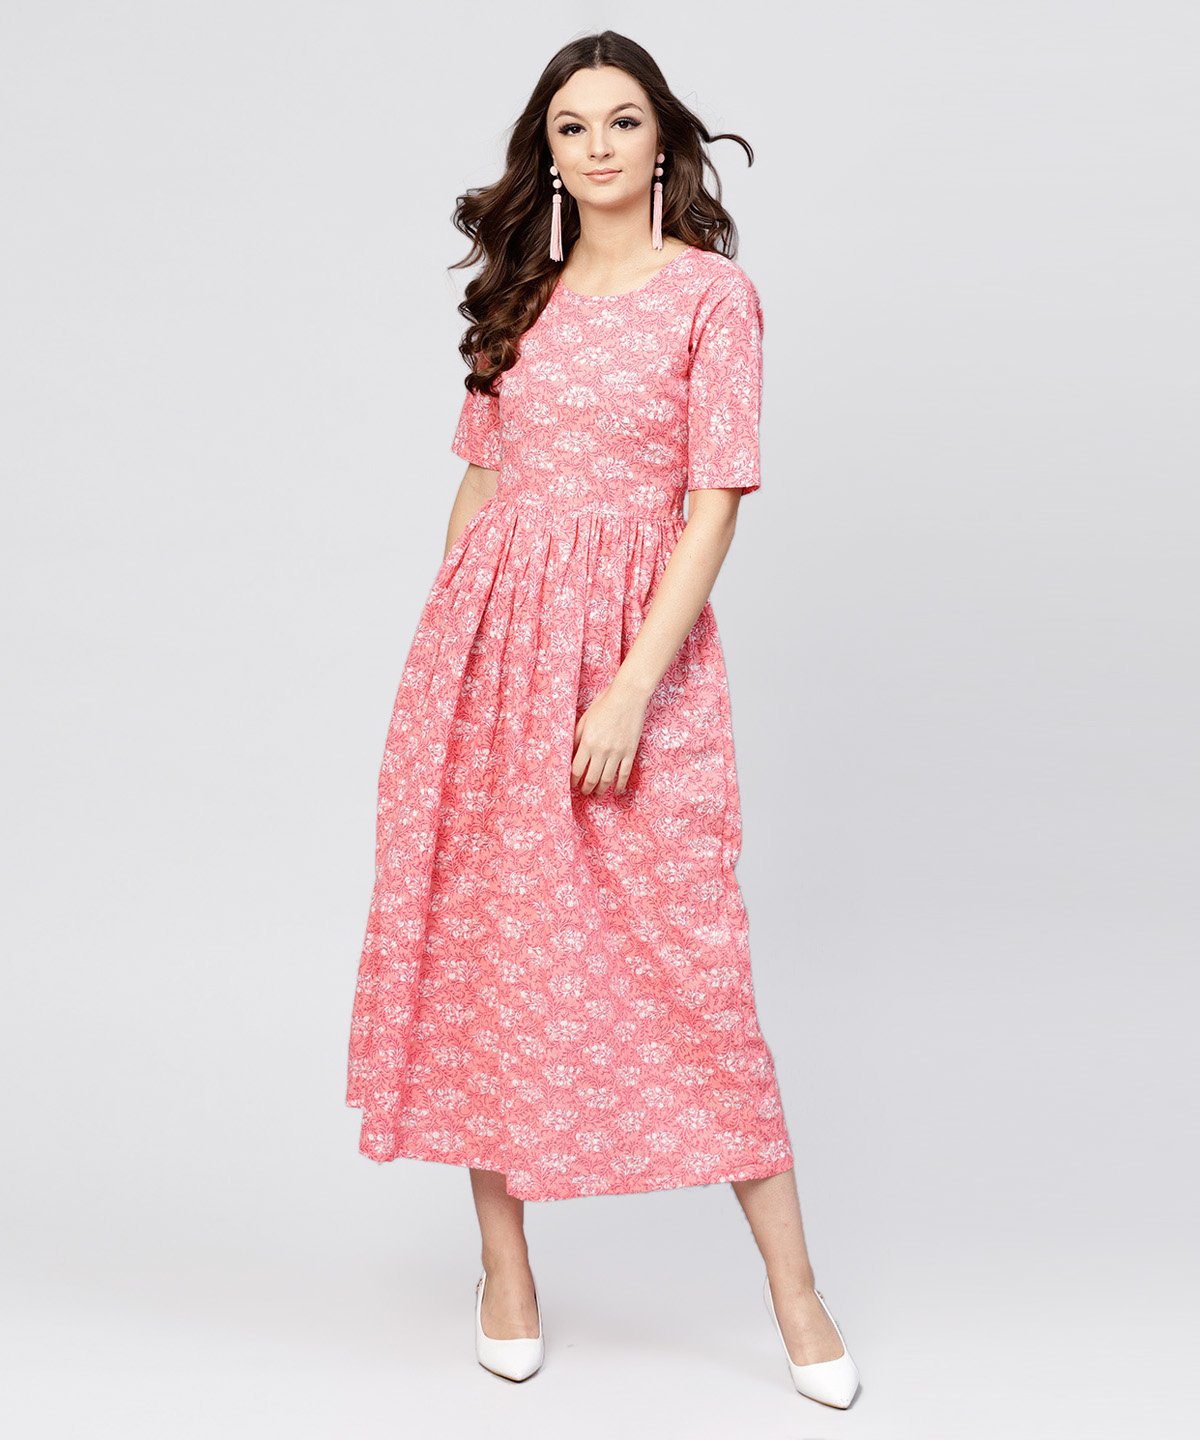 Women's Pink Printed Dress With Round Neck And Half Sleeves - Nayo Clothing